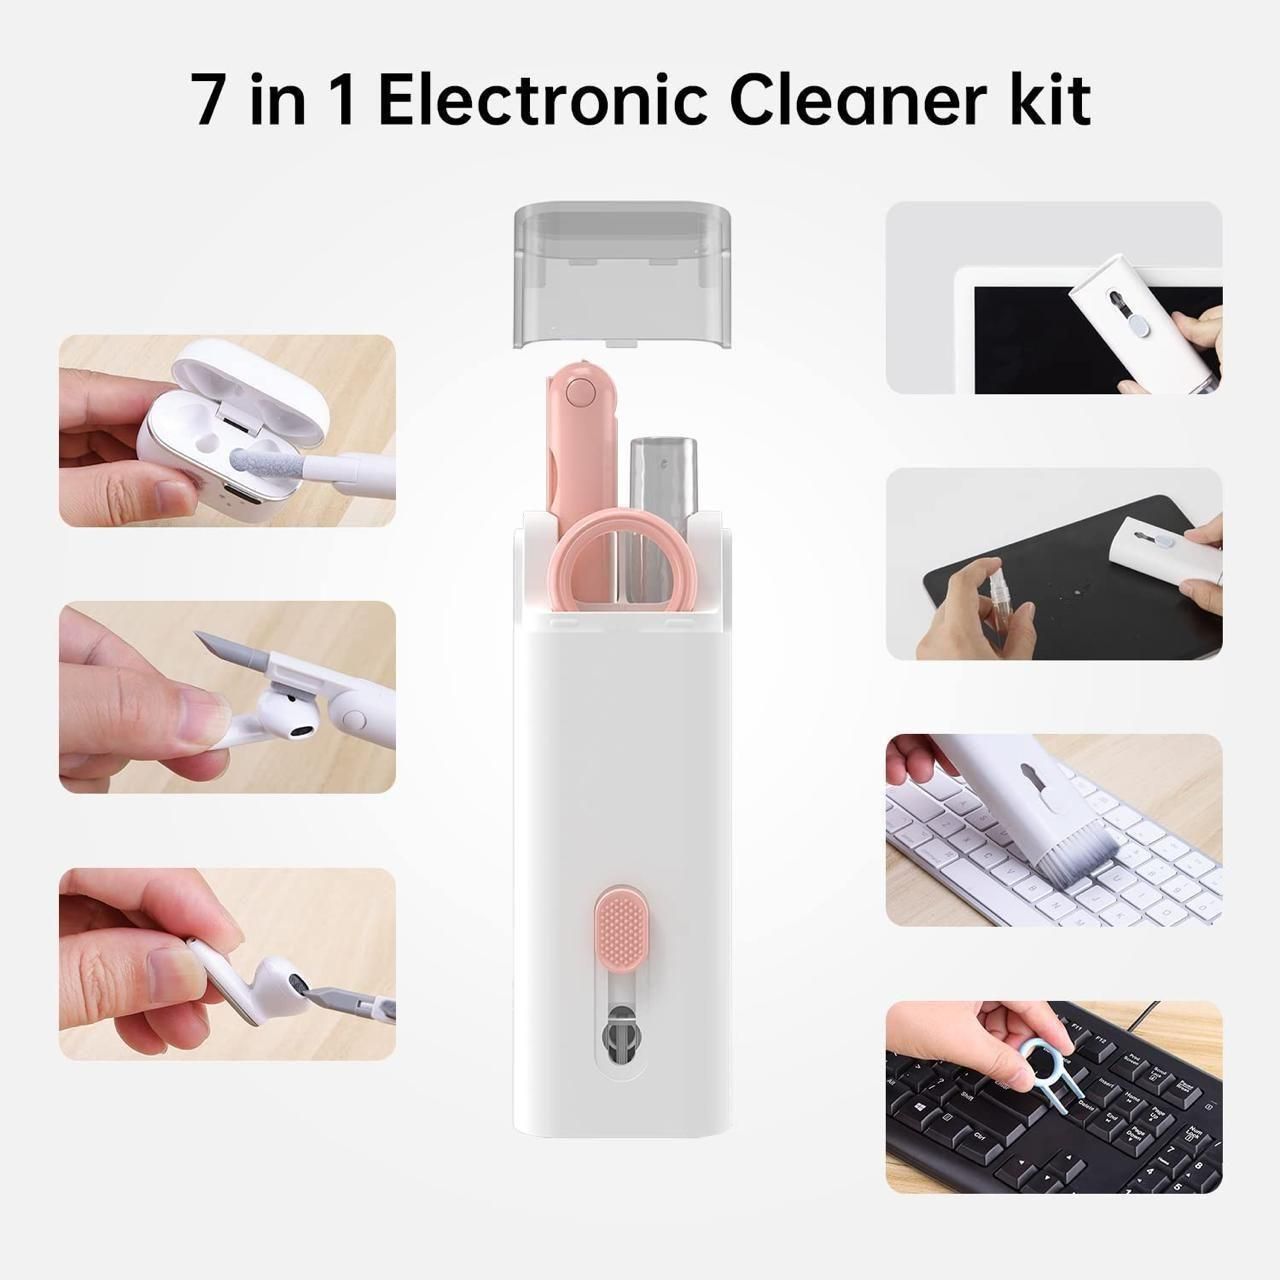 7 in 1 Electronic Cleaner Kit with Brush - KronicKart